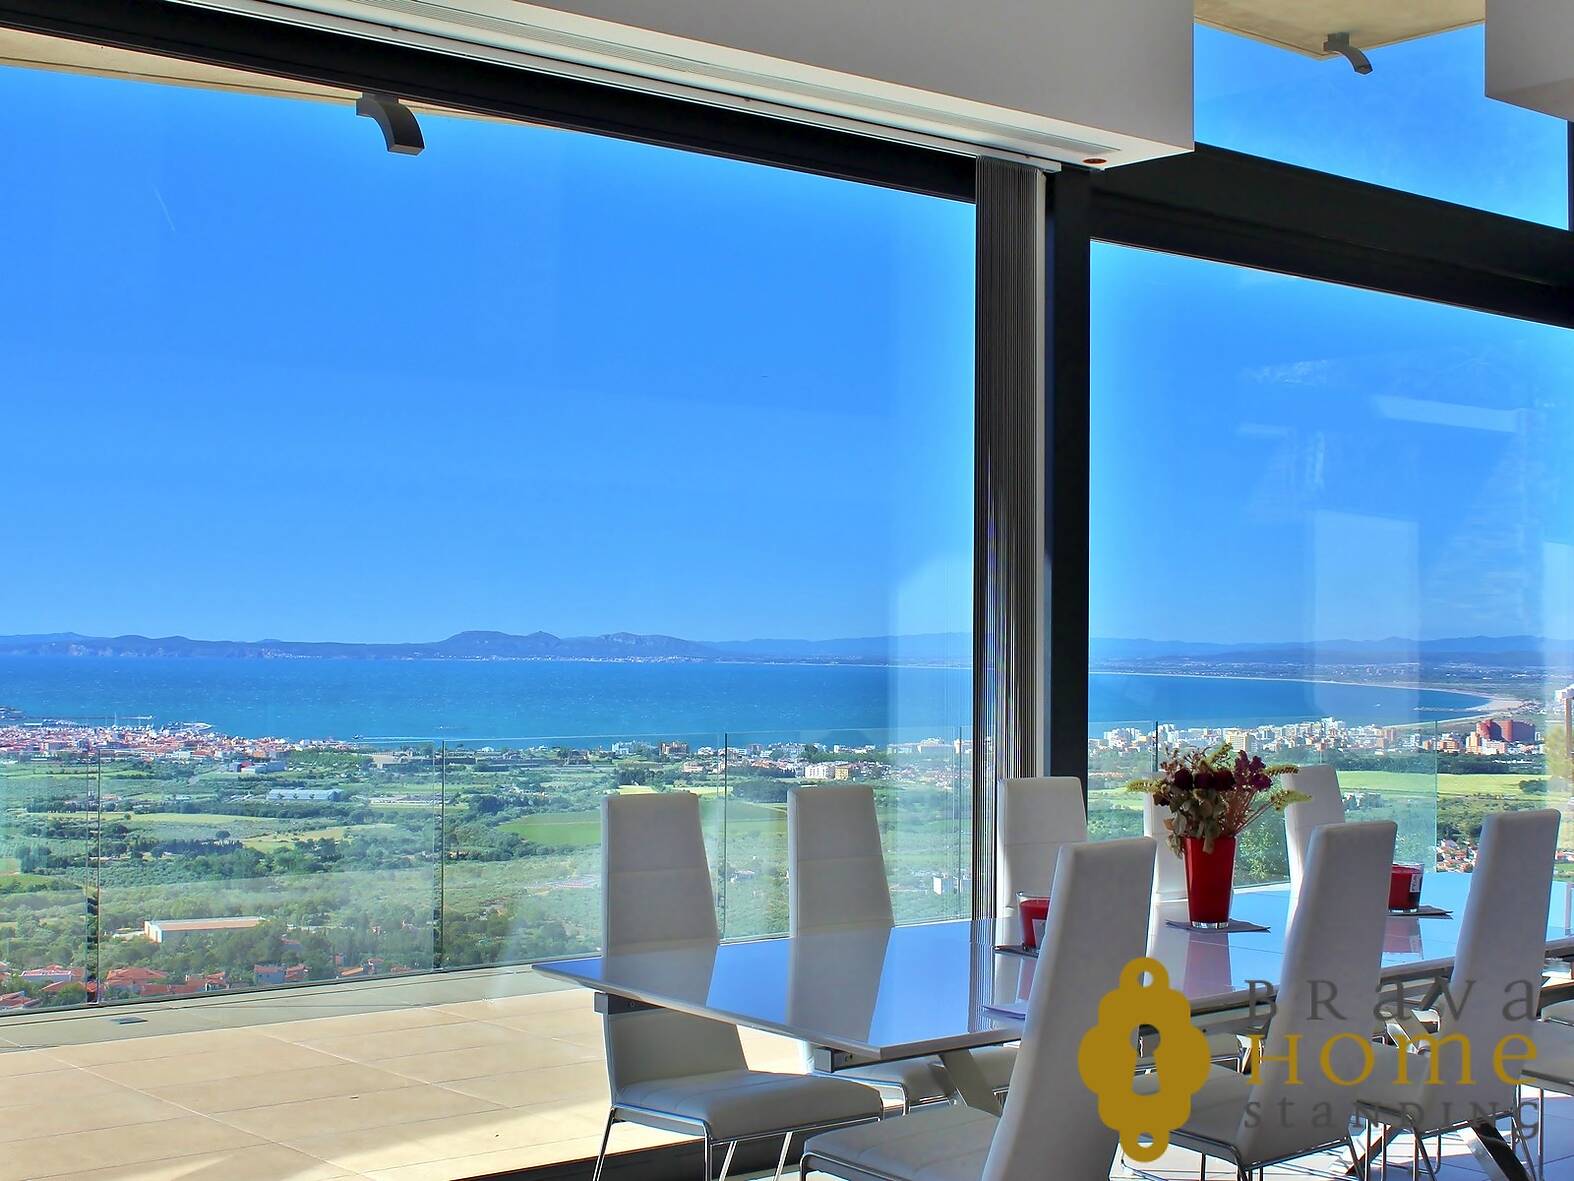 Luxurious villa with southern exposure and stunning views over the bay of Roses